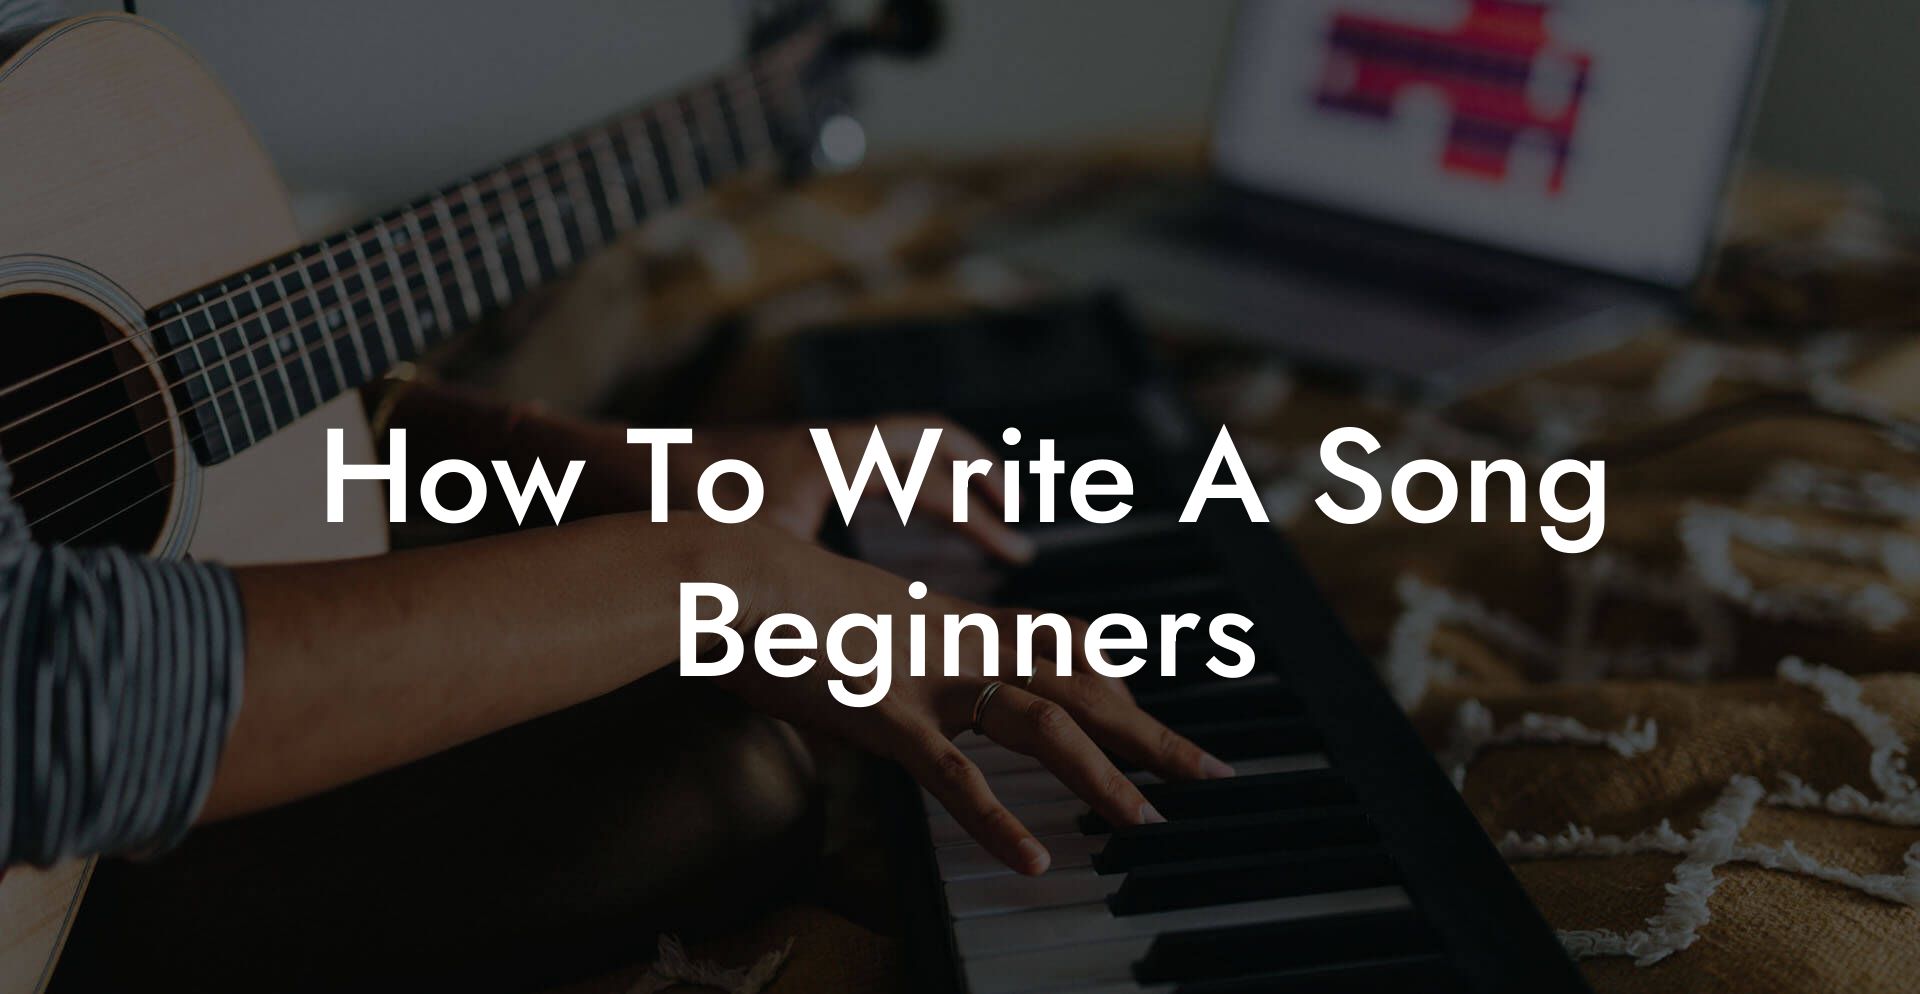 how to write a song beginners lyric assistant